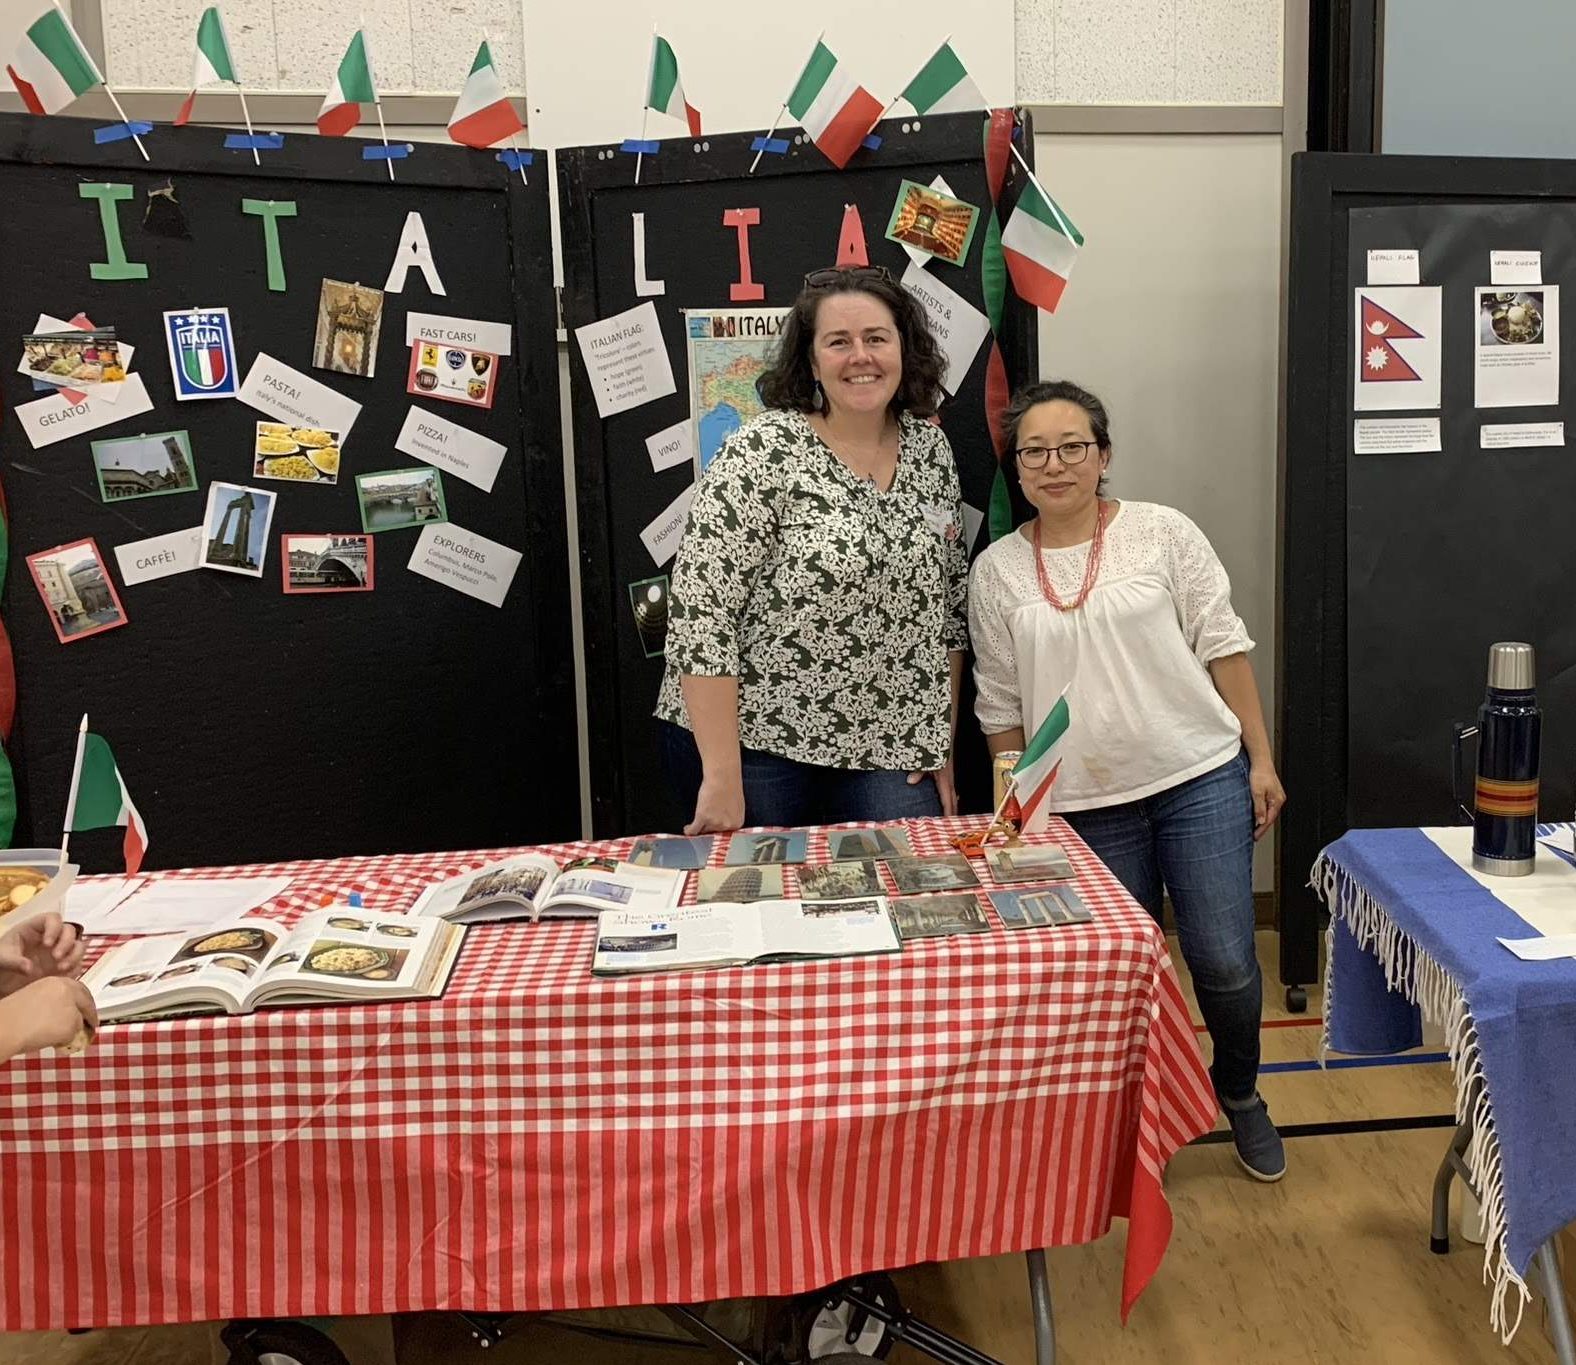 Festival of cultures booth - Italy